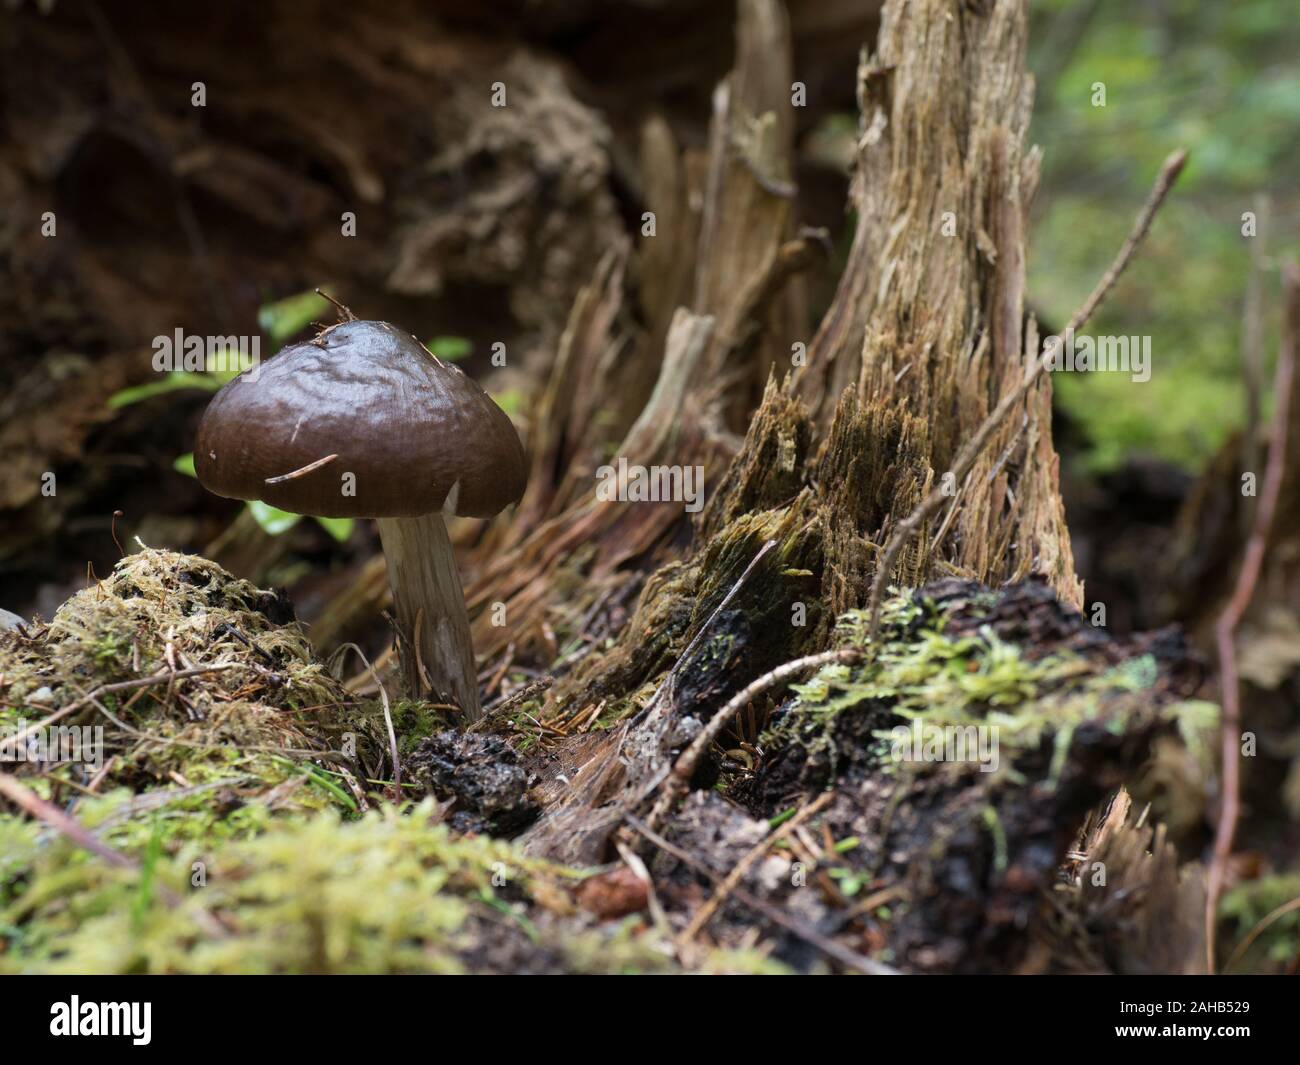 Pluteus cervinus, commonly known as the deer shield or the deer or fawn mushroom, growing in Görvälns naturreservat, Sweden. Stock Photo